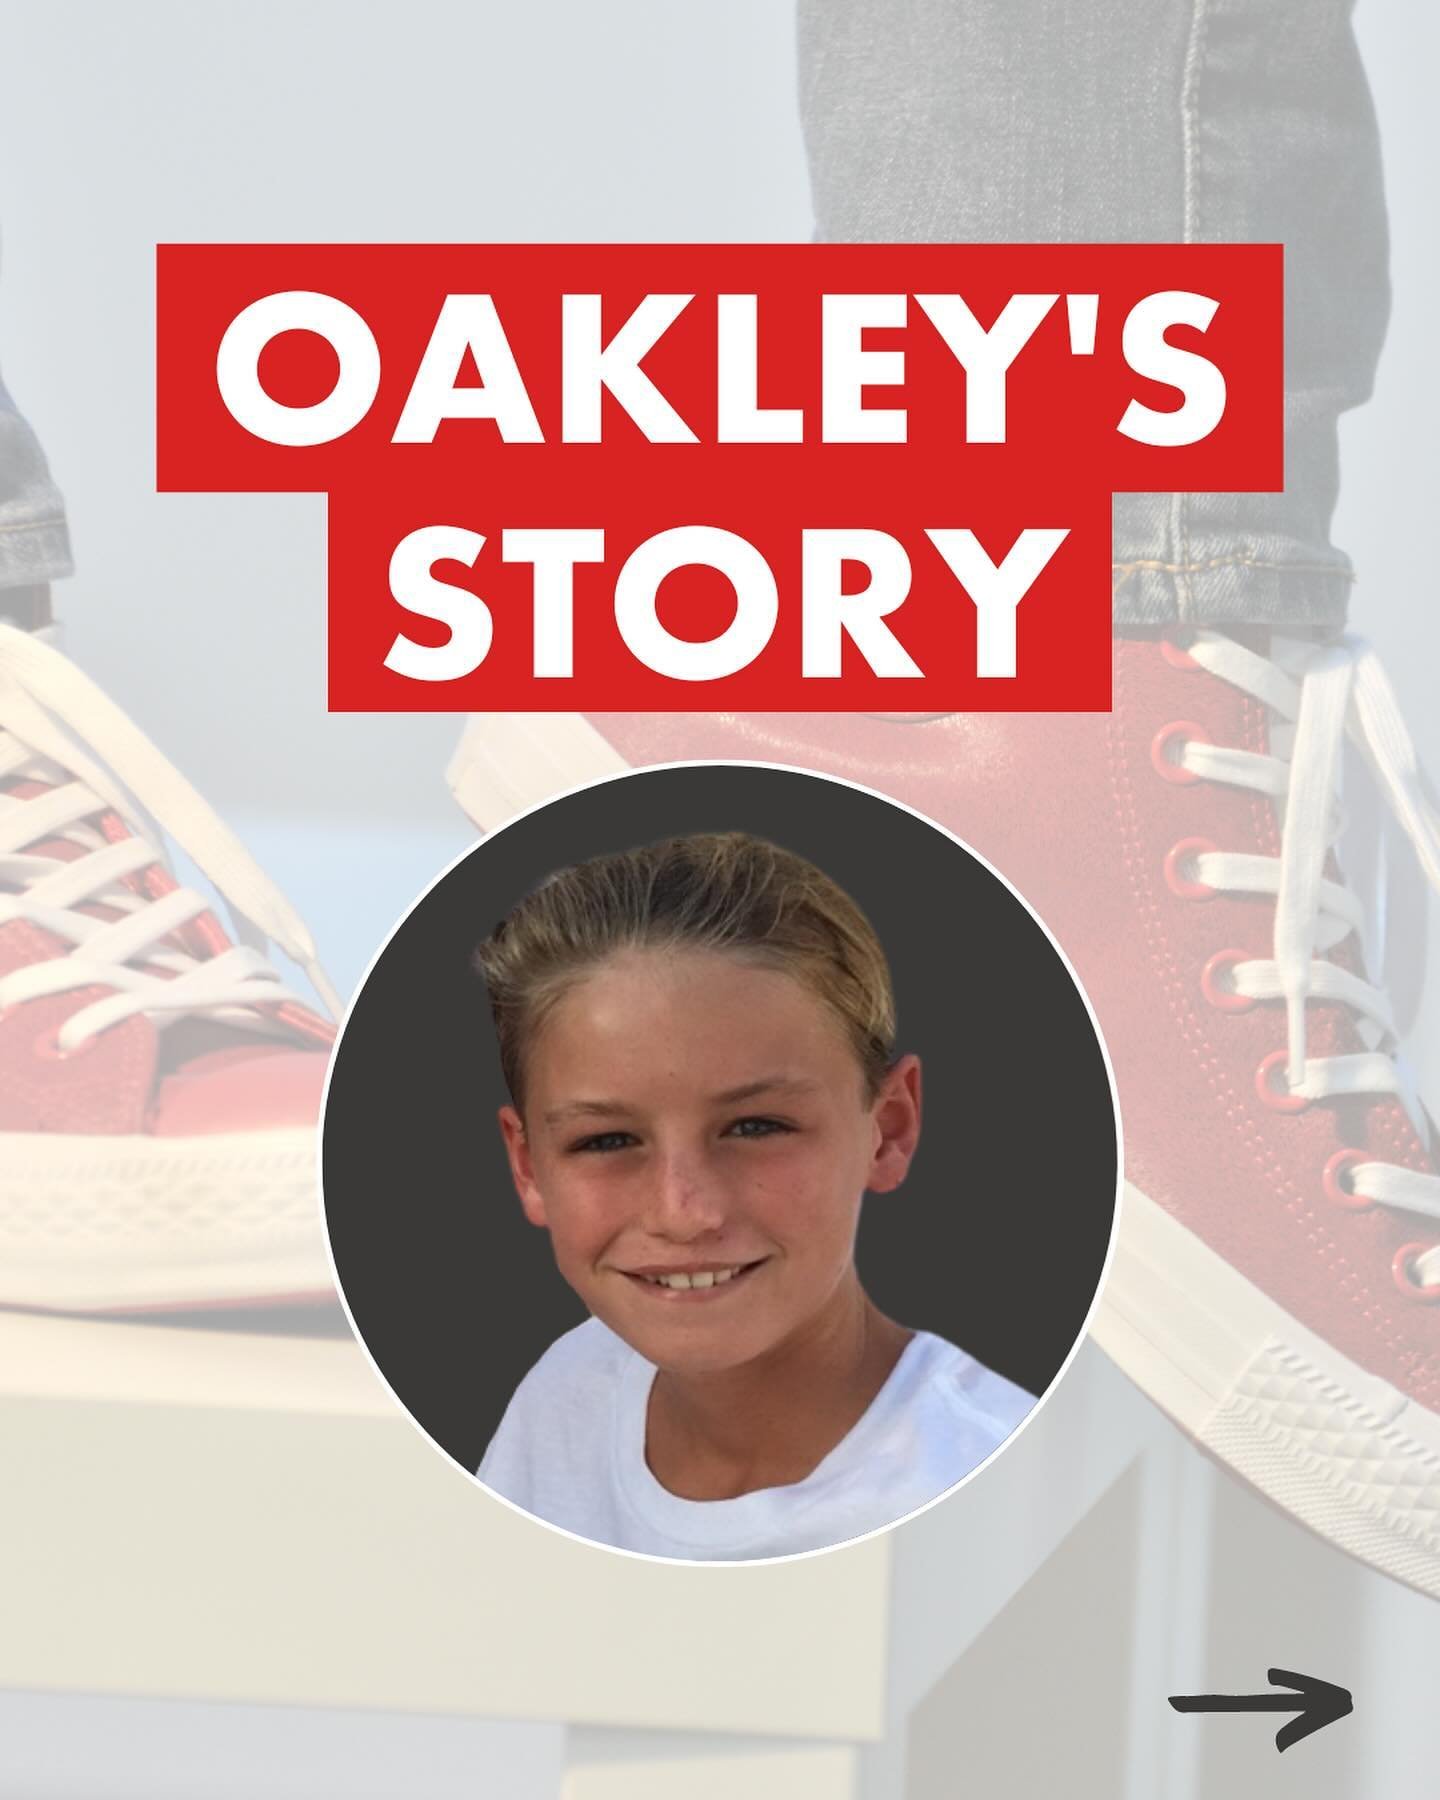 Oakley was the love of our lives and words can&rsquo;t begin to describe how much we miss him every second of every day.
 
People often ask us what happened to Oakley, and we feel it&rsquo;s important to share his story because we don&rsquo;t want an